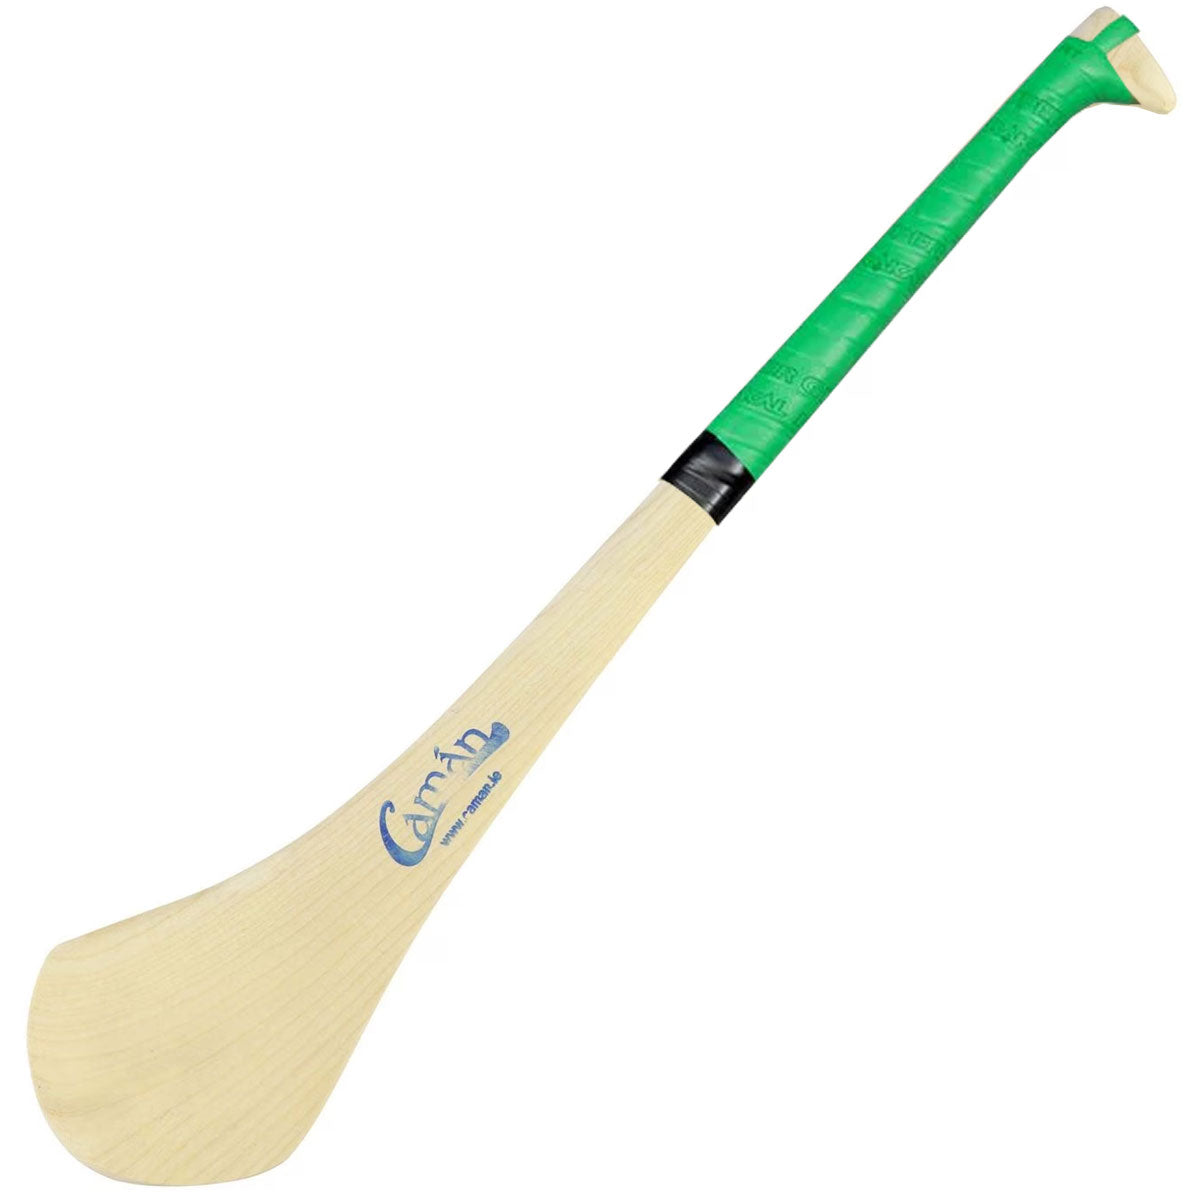 Caman Hurling Stick size 20 (Inches)